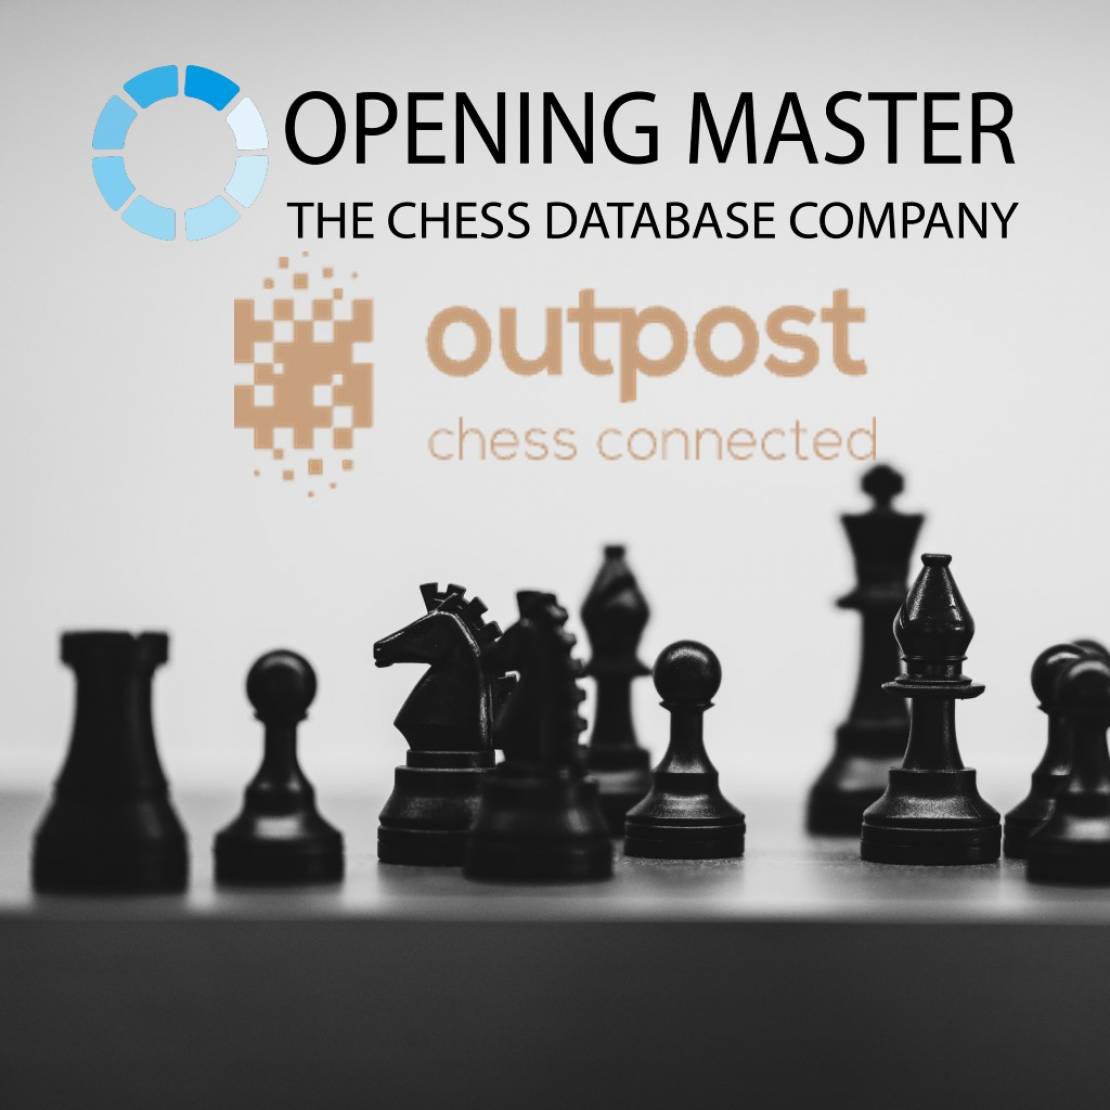 The Outpost Chess and Opening Master Partner to Create Global Chess Community for Players, Coaches, Arbiters, and Clubs